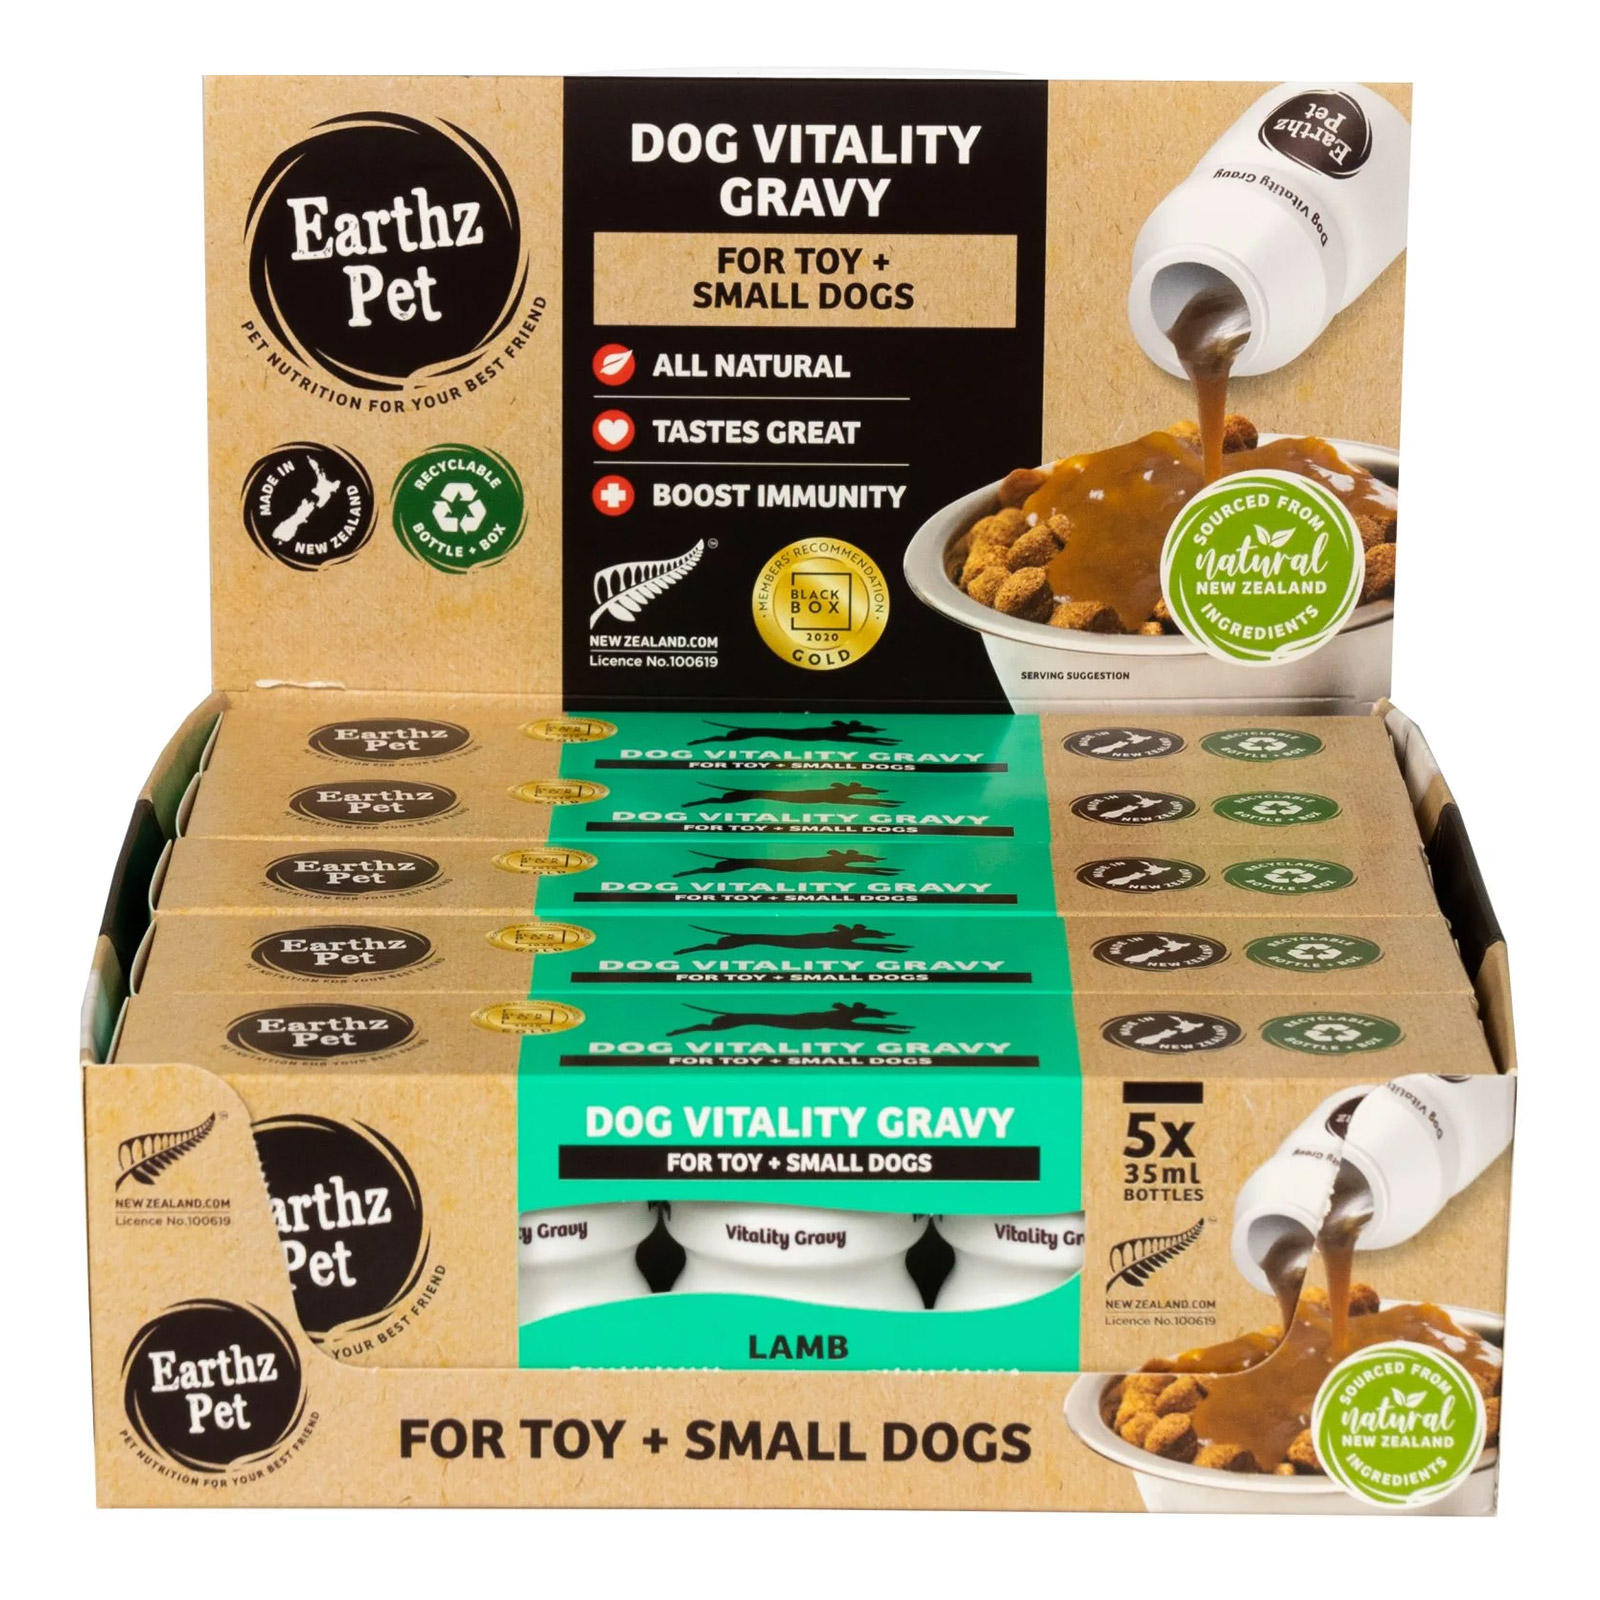 Earthz Pet Free Range Lamb Vitality Gravy For Toy And Small Dogs 35ml